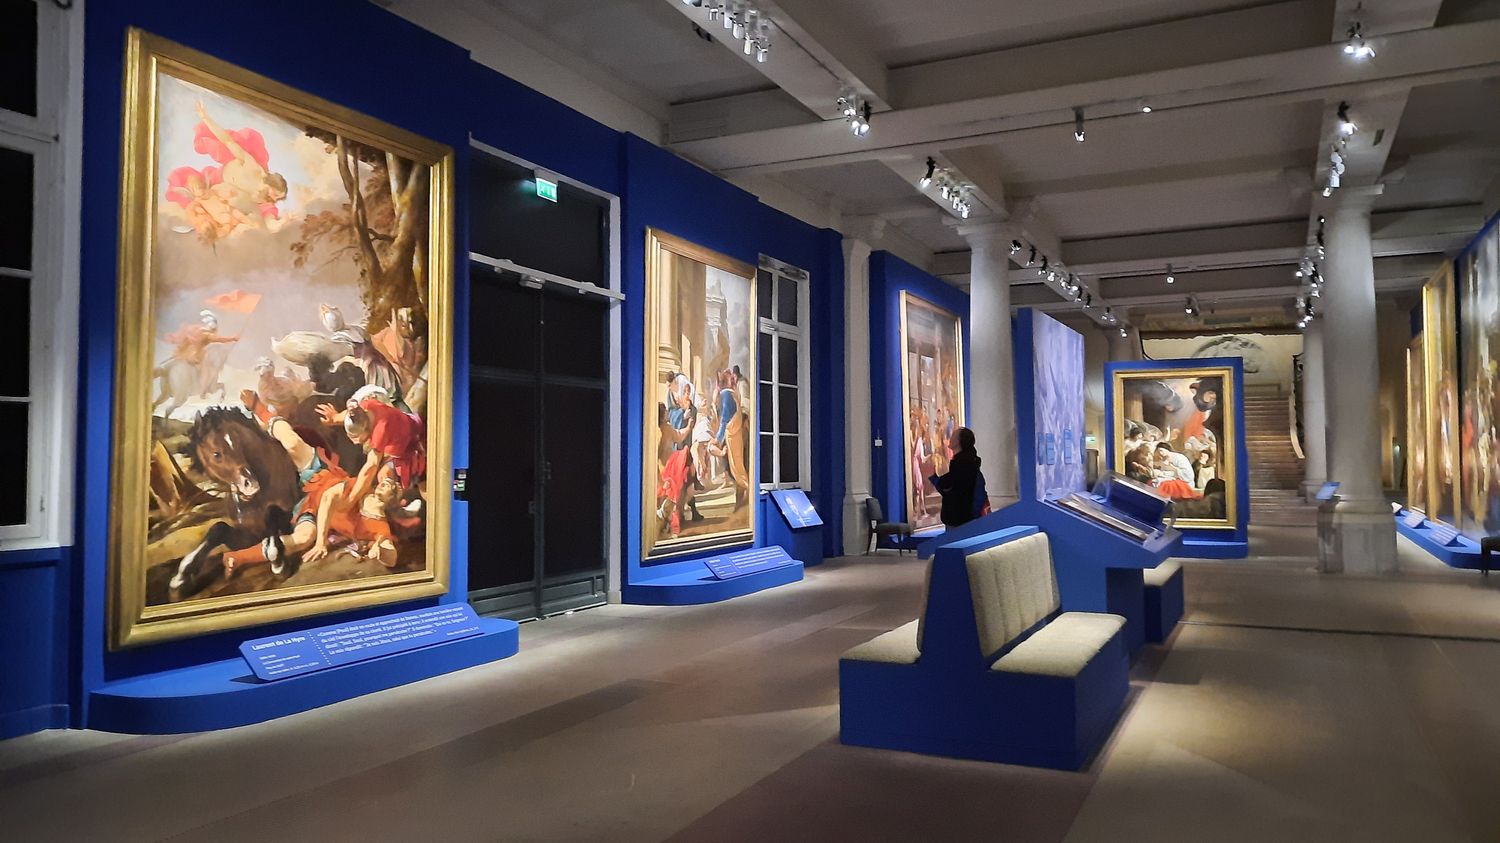 "It's truly a meeting of masterpieces": the superb restored decorations of Notre-Dame on display at the Mobilier national fair